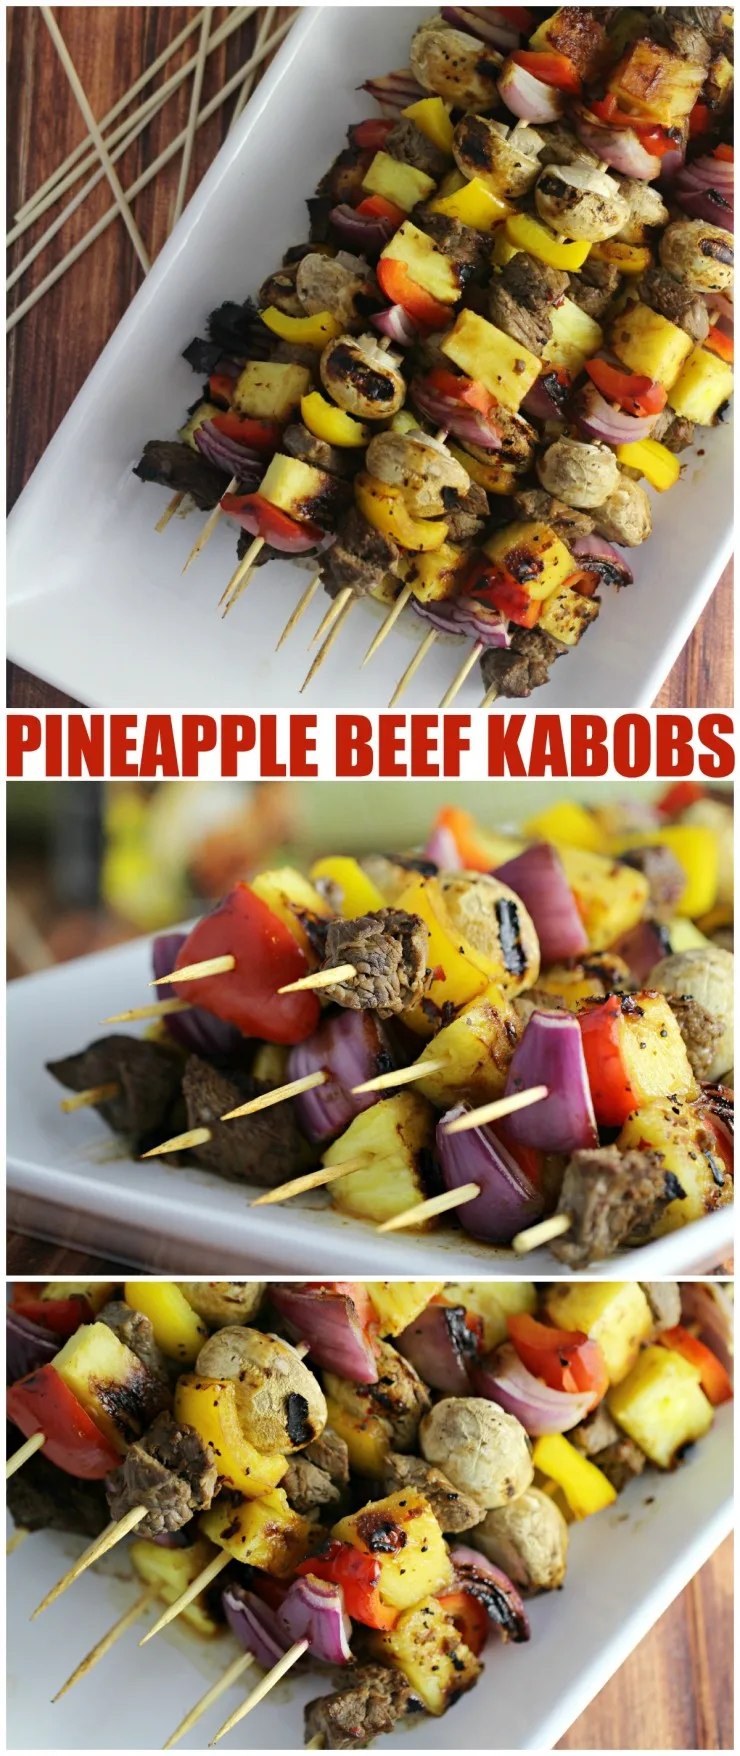 These Pineapple Tamarind Beef Kabobs are full of tropical flavours and deliciously grilled to perfection for a family dinner you will make again and again.